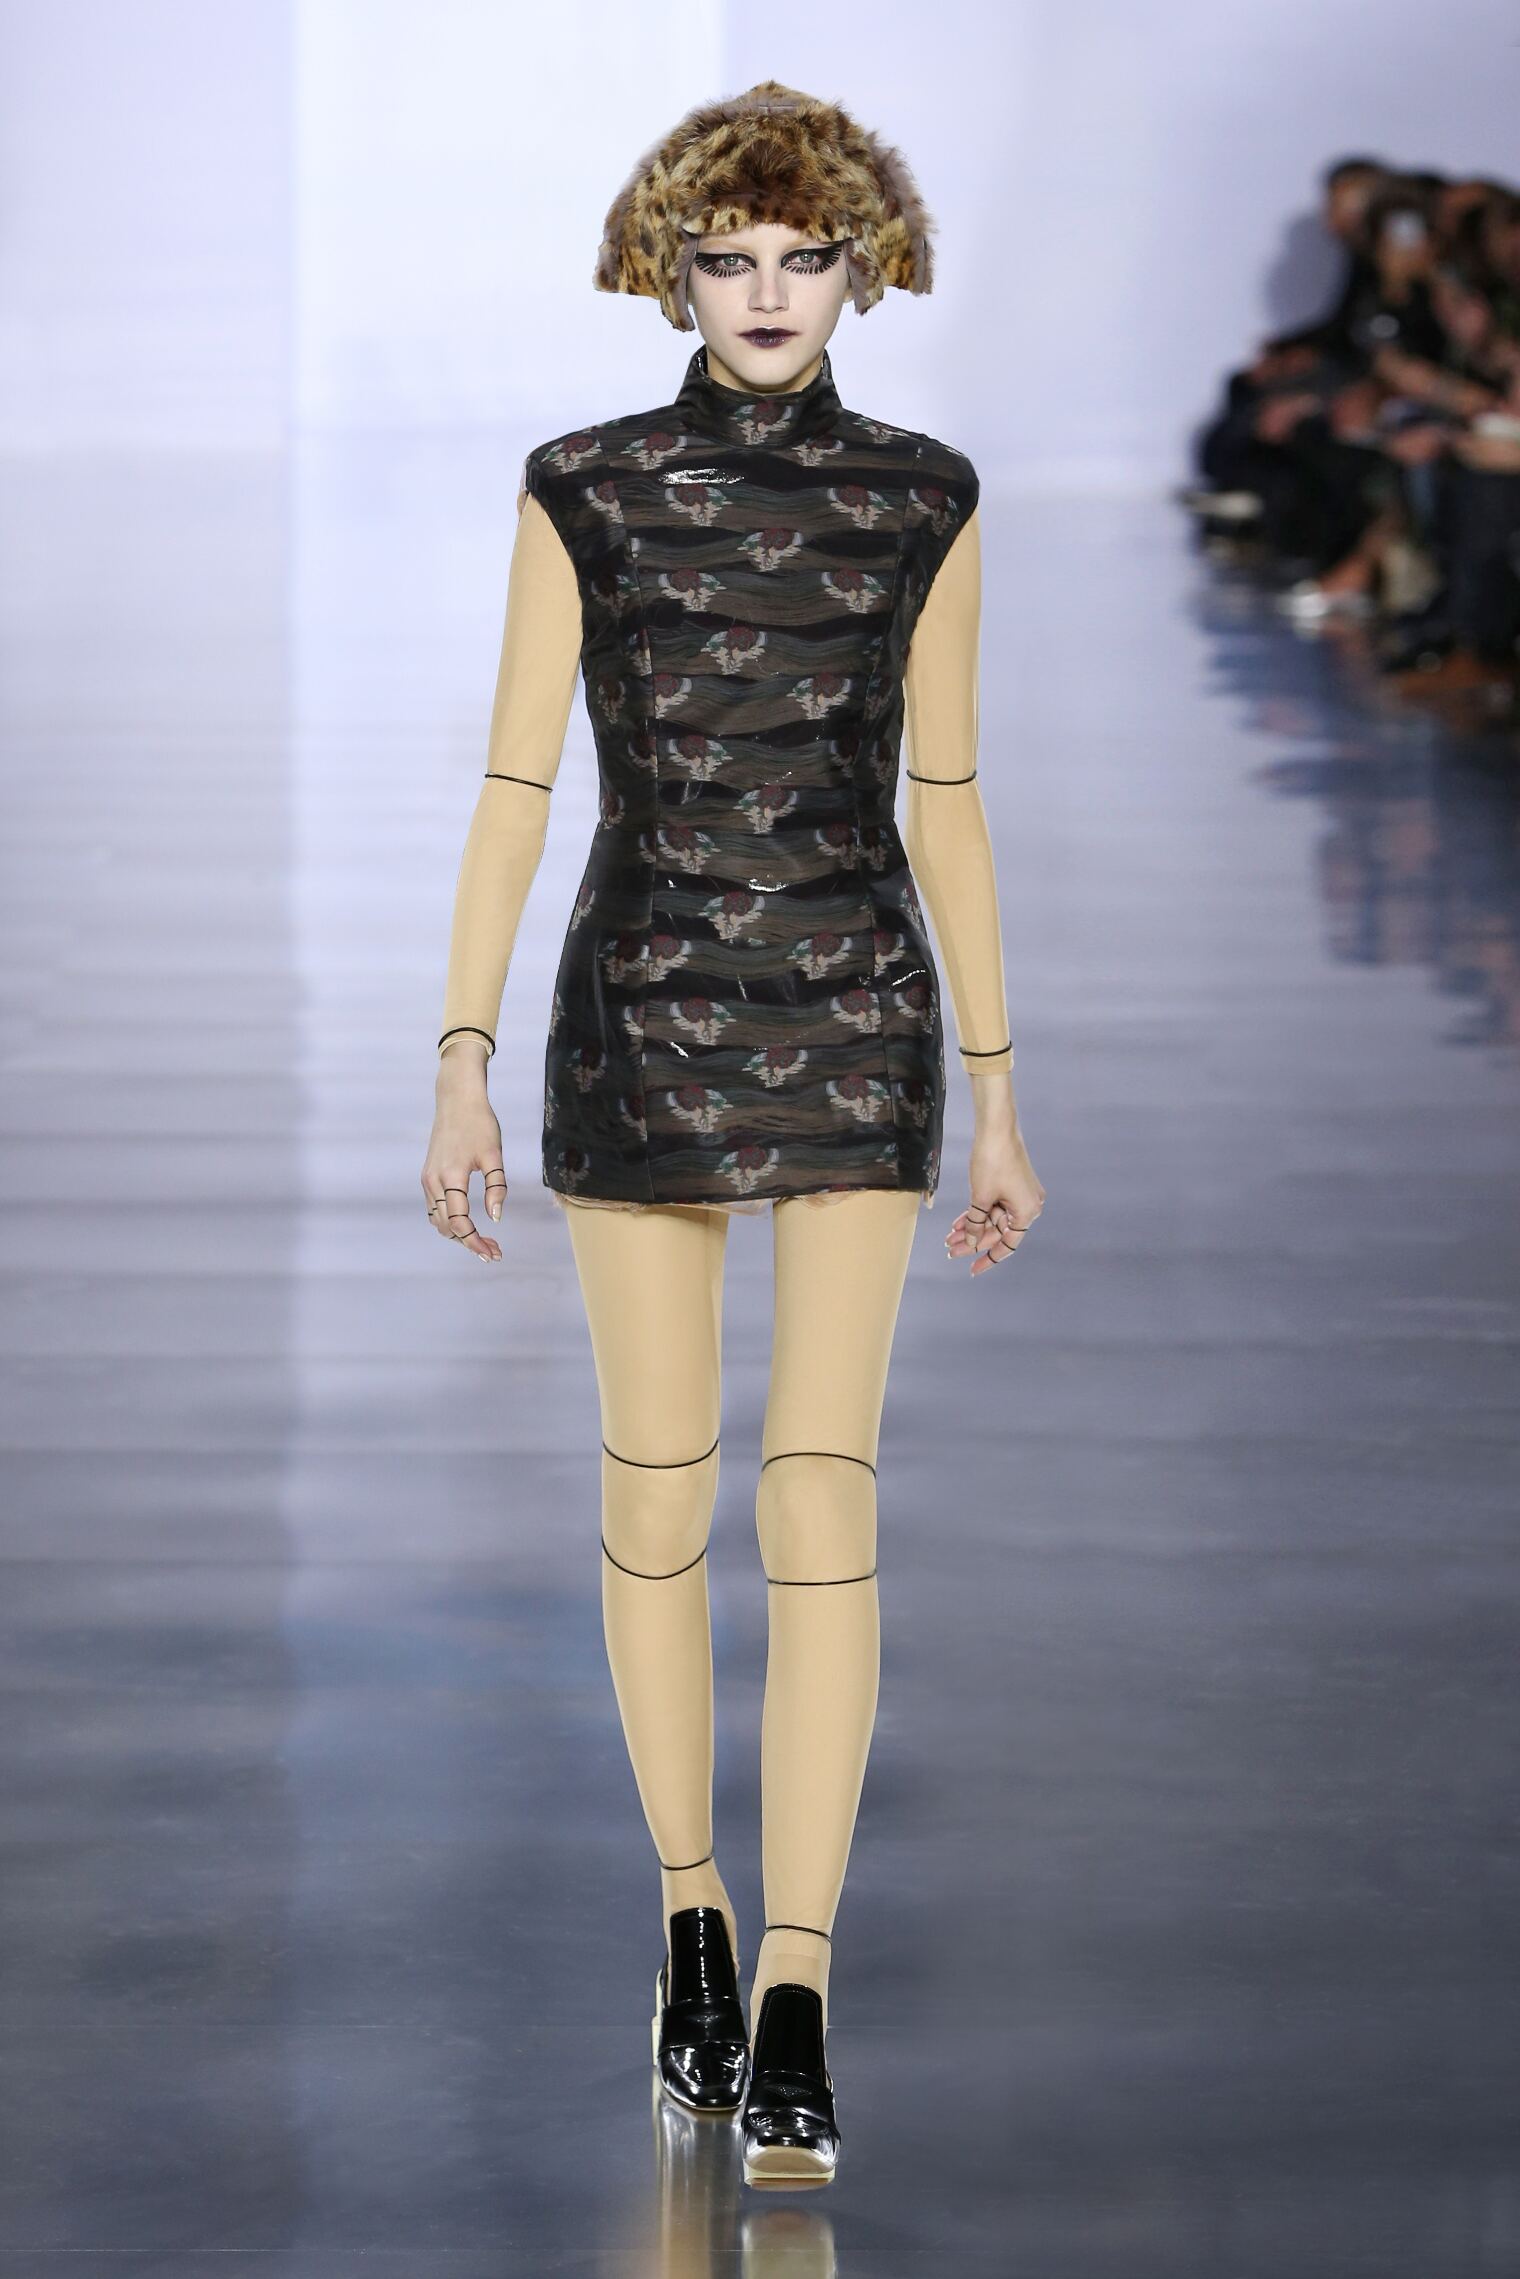 MAISON MARGIELA FALL WINTER 2015-16 WOMEN’S COLLECTION | The Skinny Beep